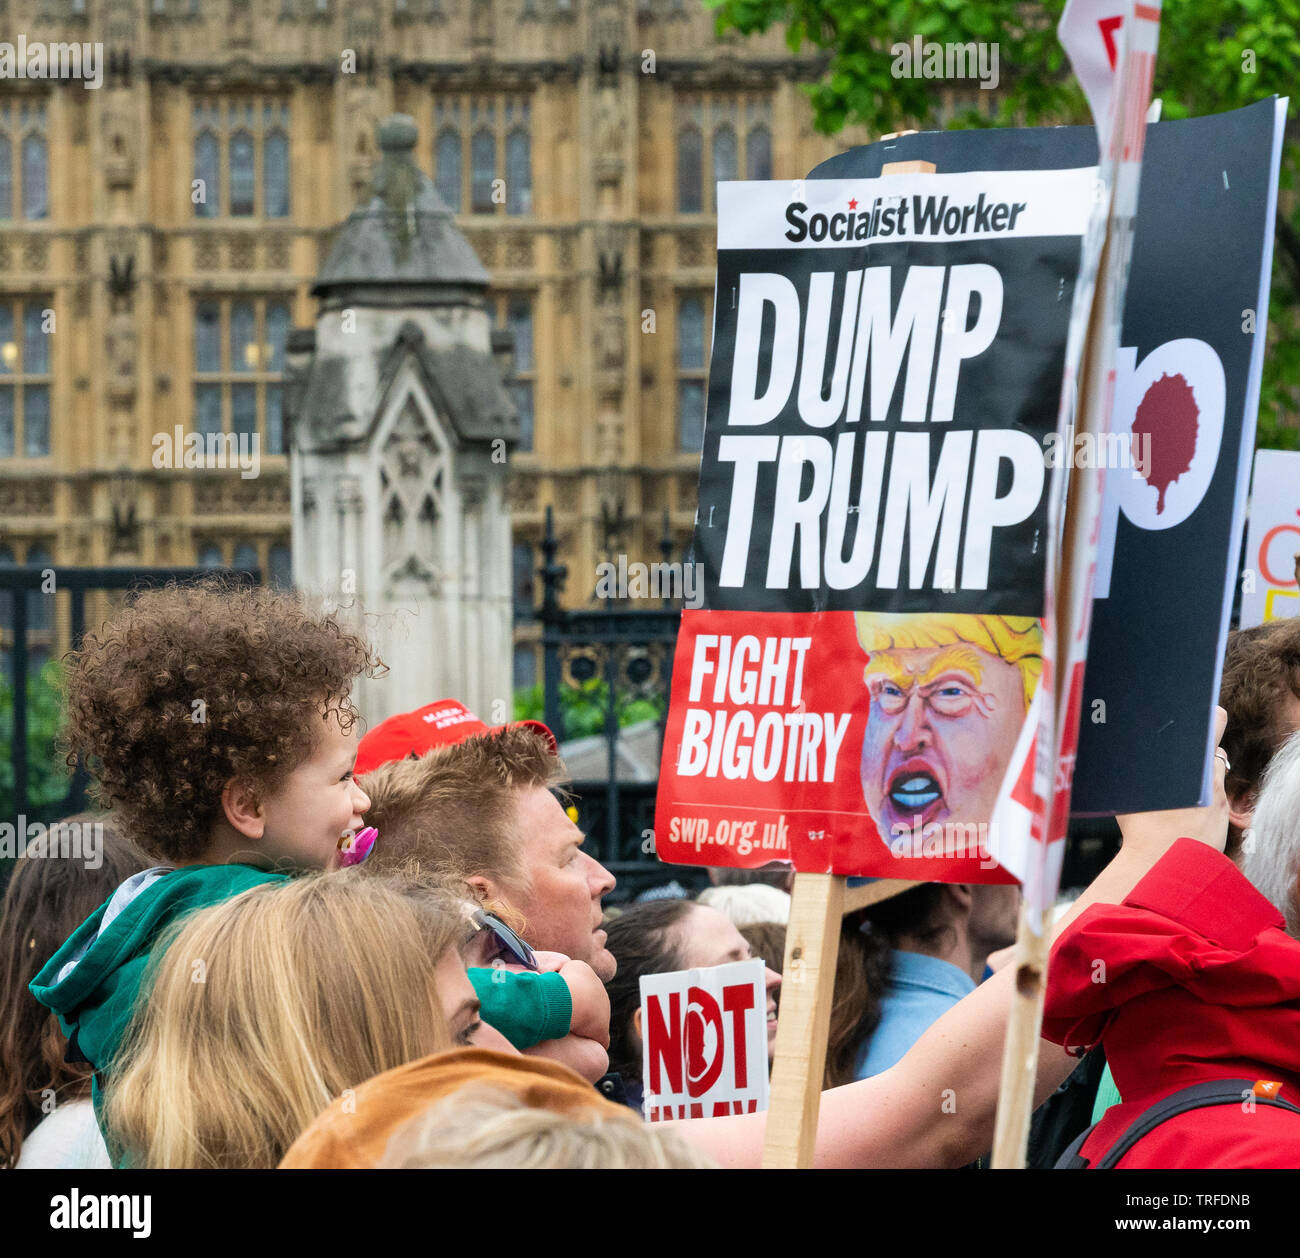 4th June 2019. London, UK. Anti Trump rally in Westminster. A child laughs at picture of Donald Trump on the placard. Stock Photo